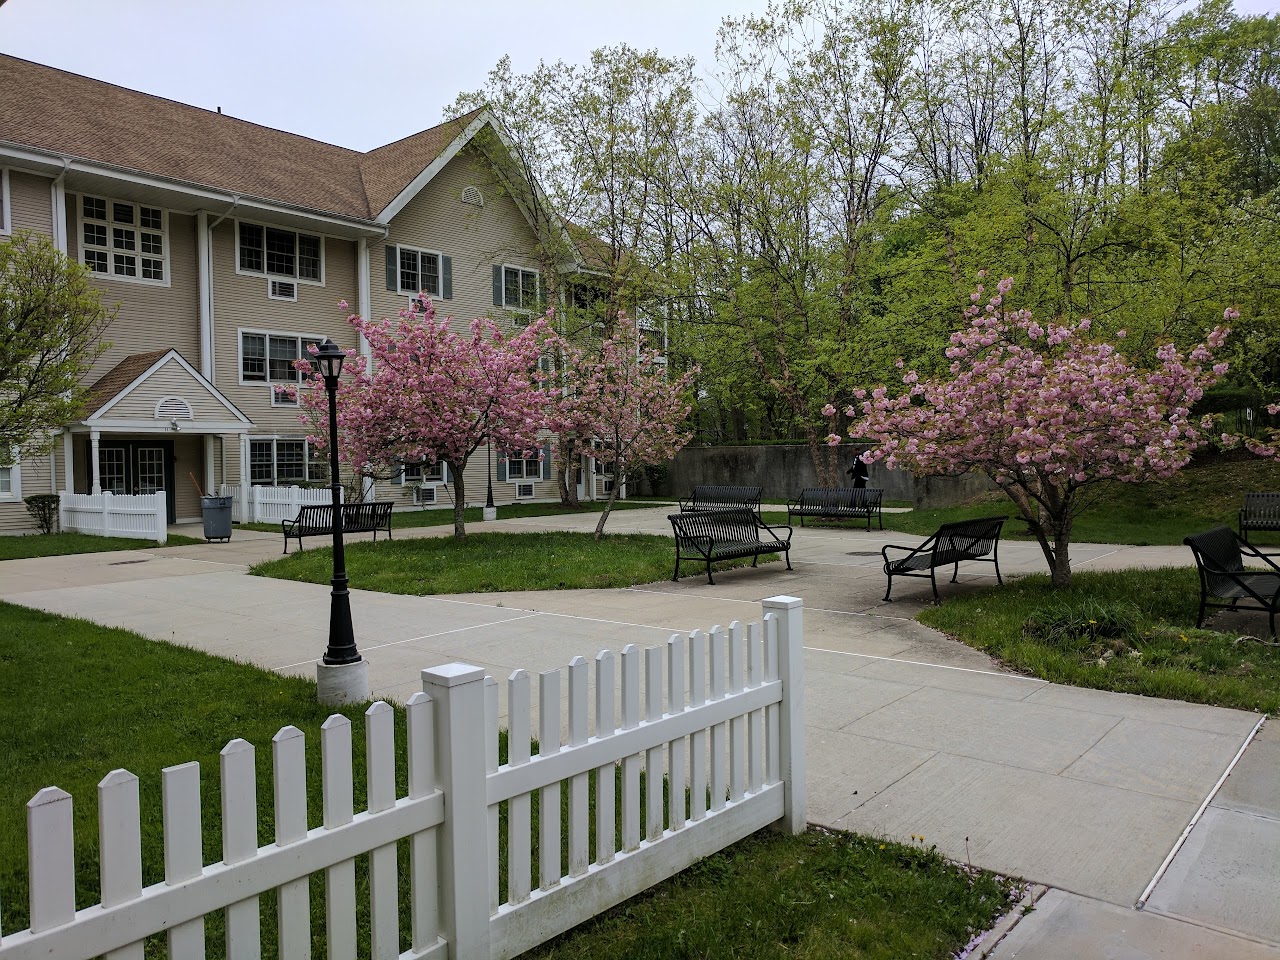 Photo of TARRYHILL APTS. Affordable housing located at 100 TARRYHILL WAY WHITE PLAINS, NY 10603